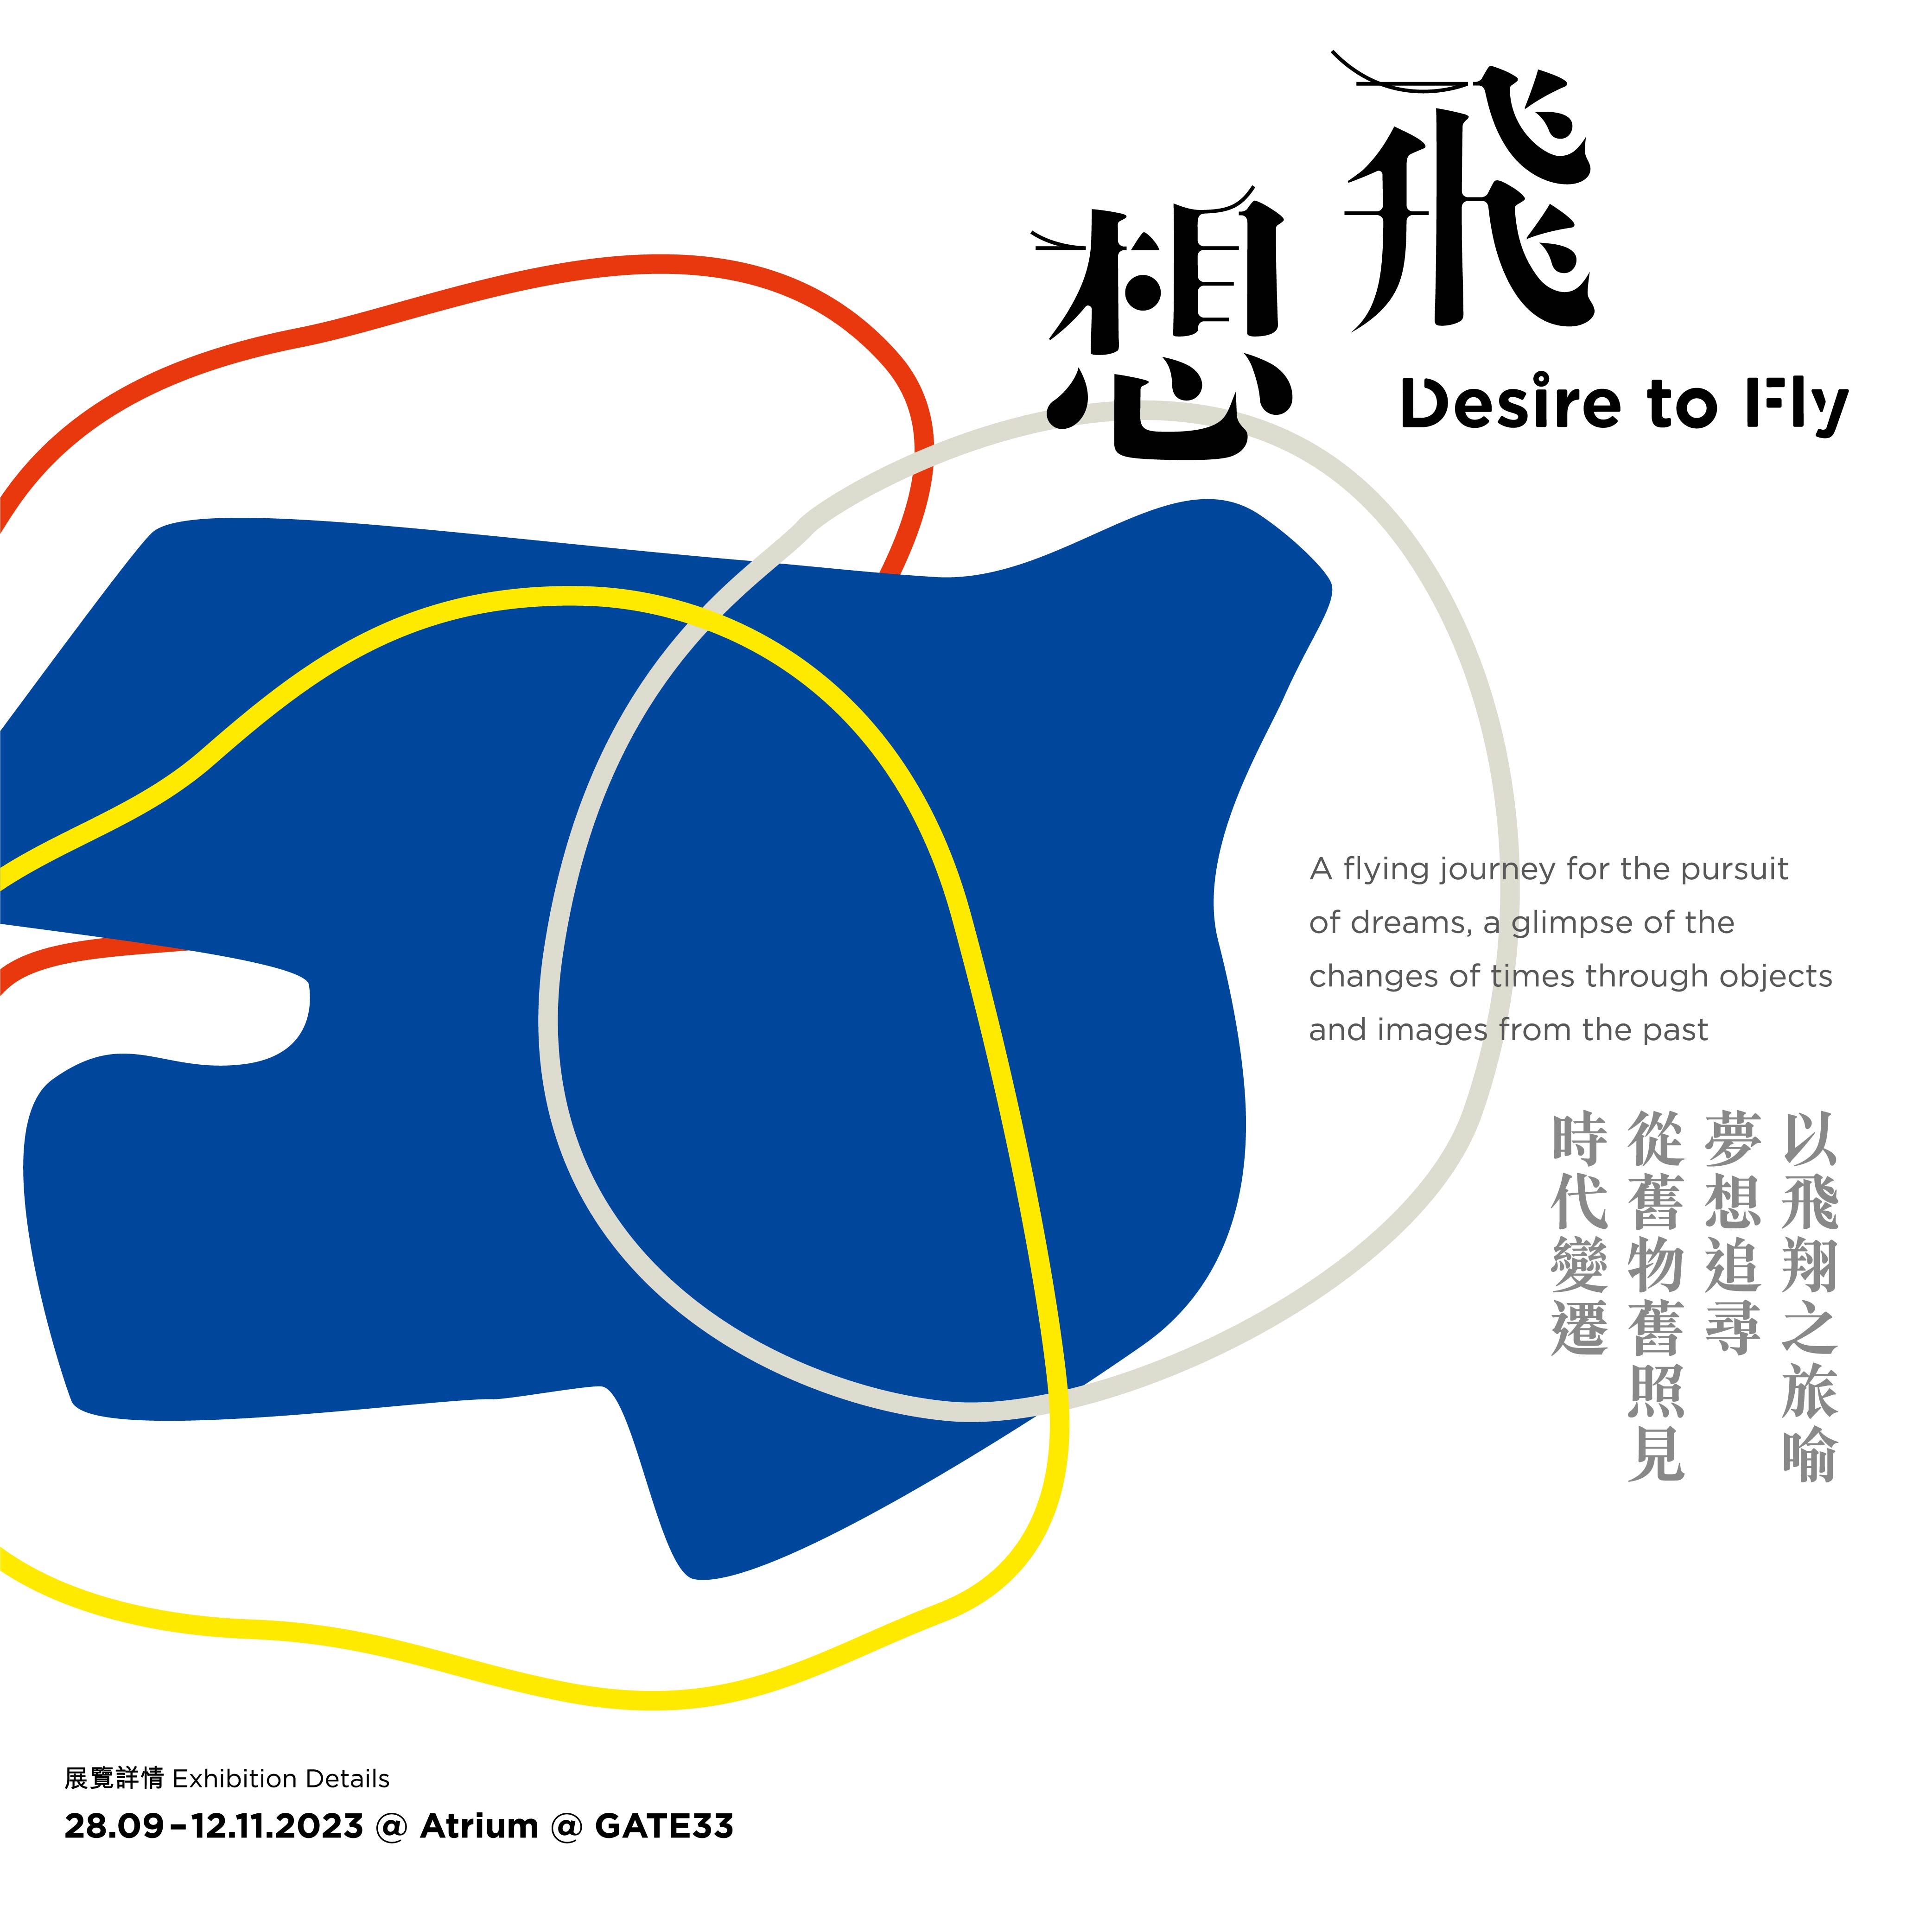 “Desire to Fly” Exhibition